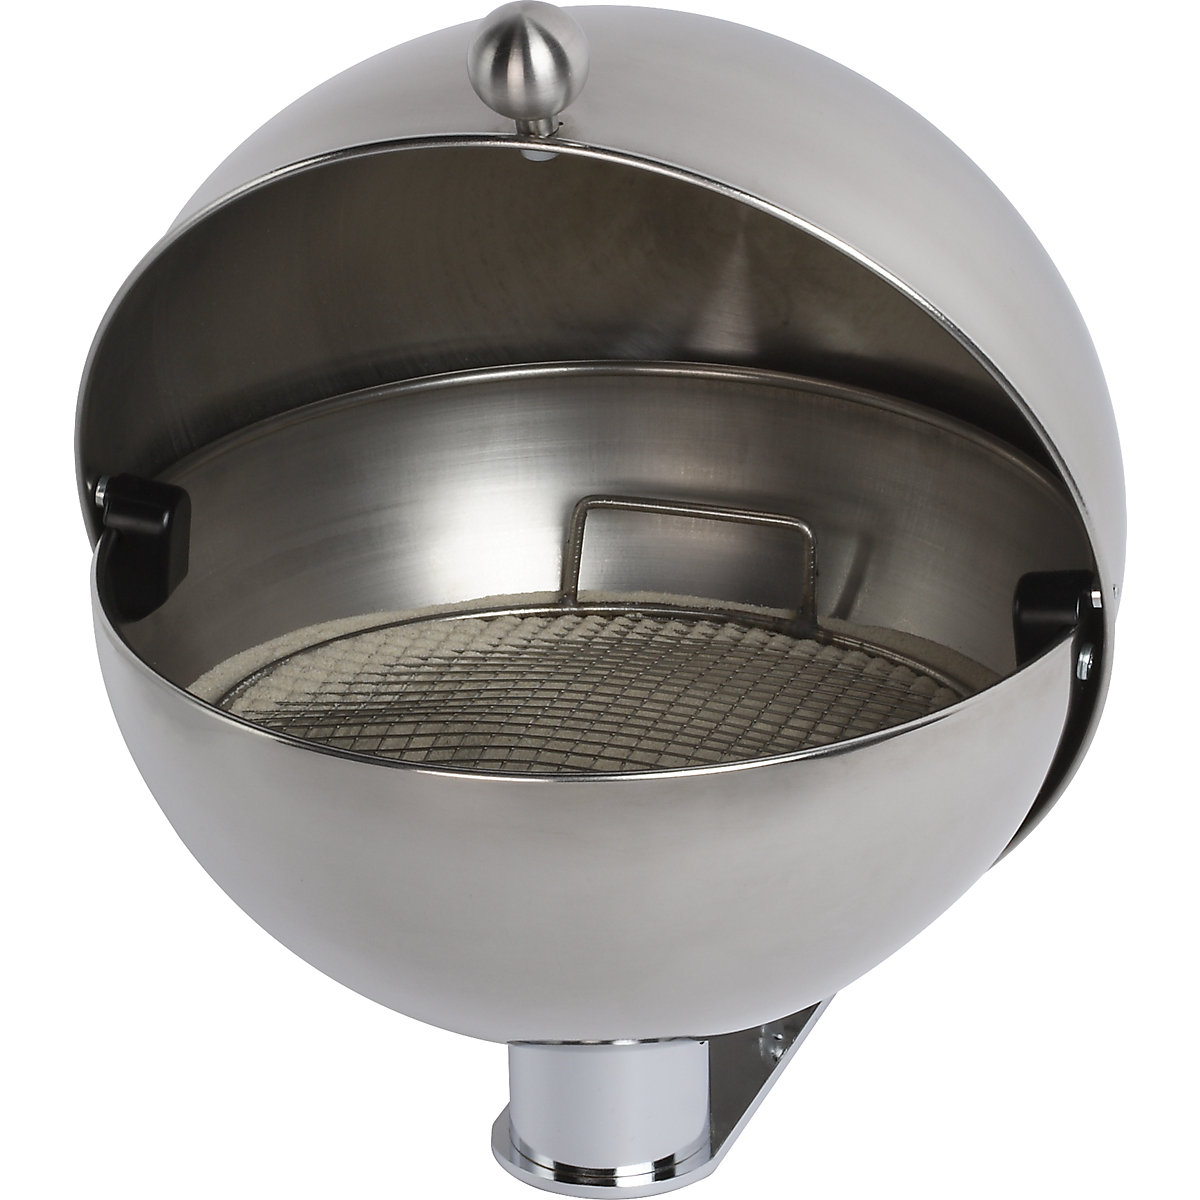 VAR – Spherical wall ashtray made of stainless steel, for wall mounting, HxWxD 280 x 260 x 300 mm